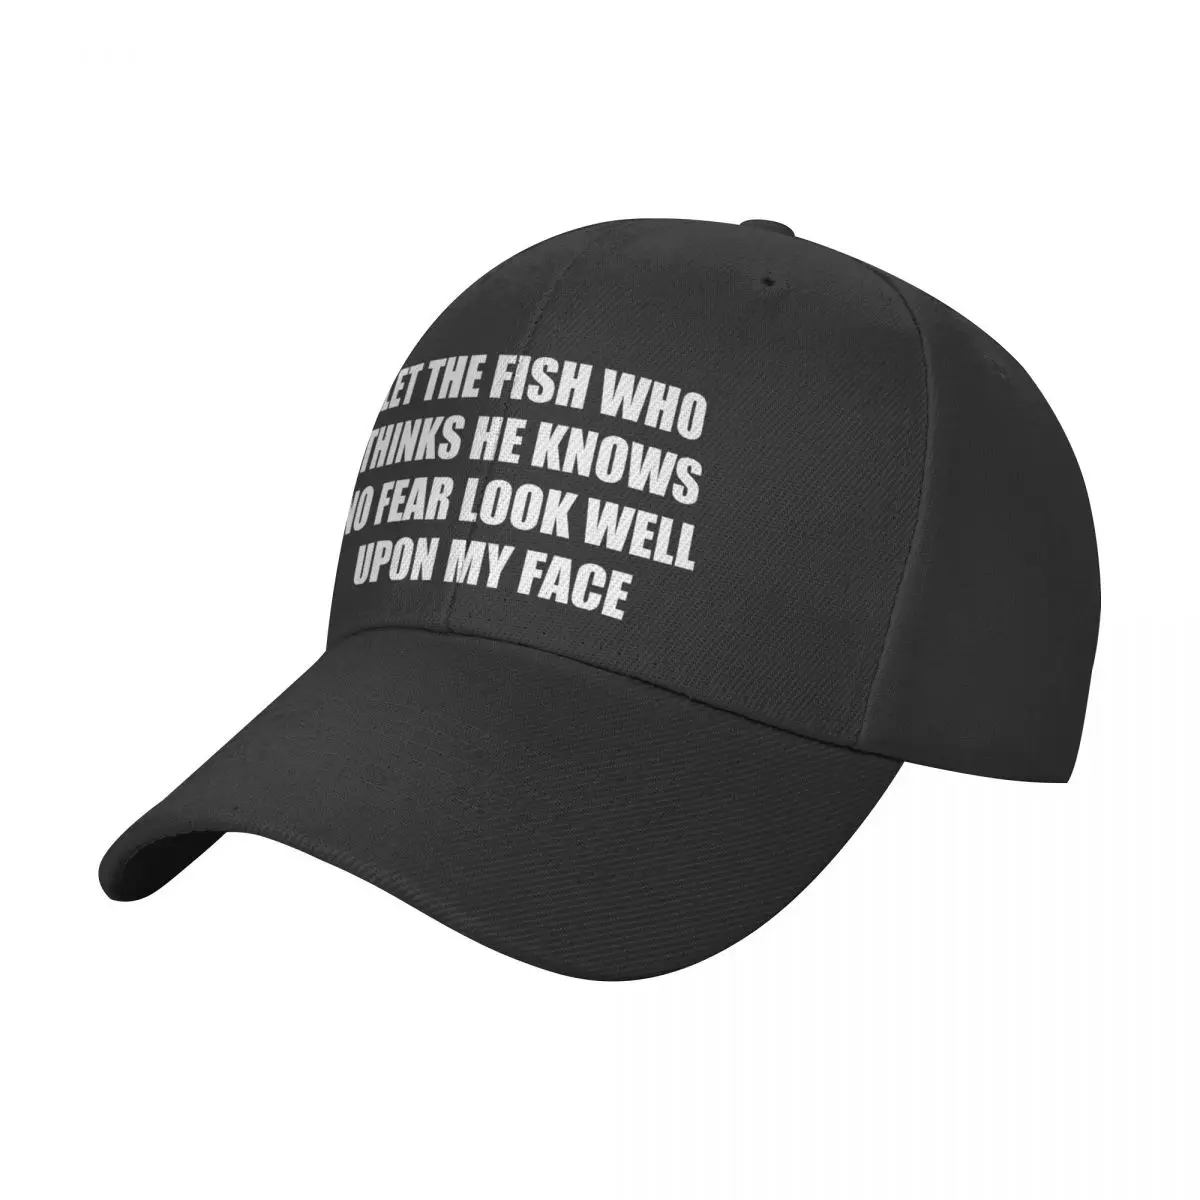 

Let The Fish Who Thinks He Knows No Fear Look Well Upon My Face Solid Color Baseball Cap Snapback Caps Hats For Men Women